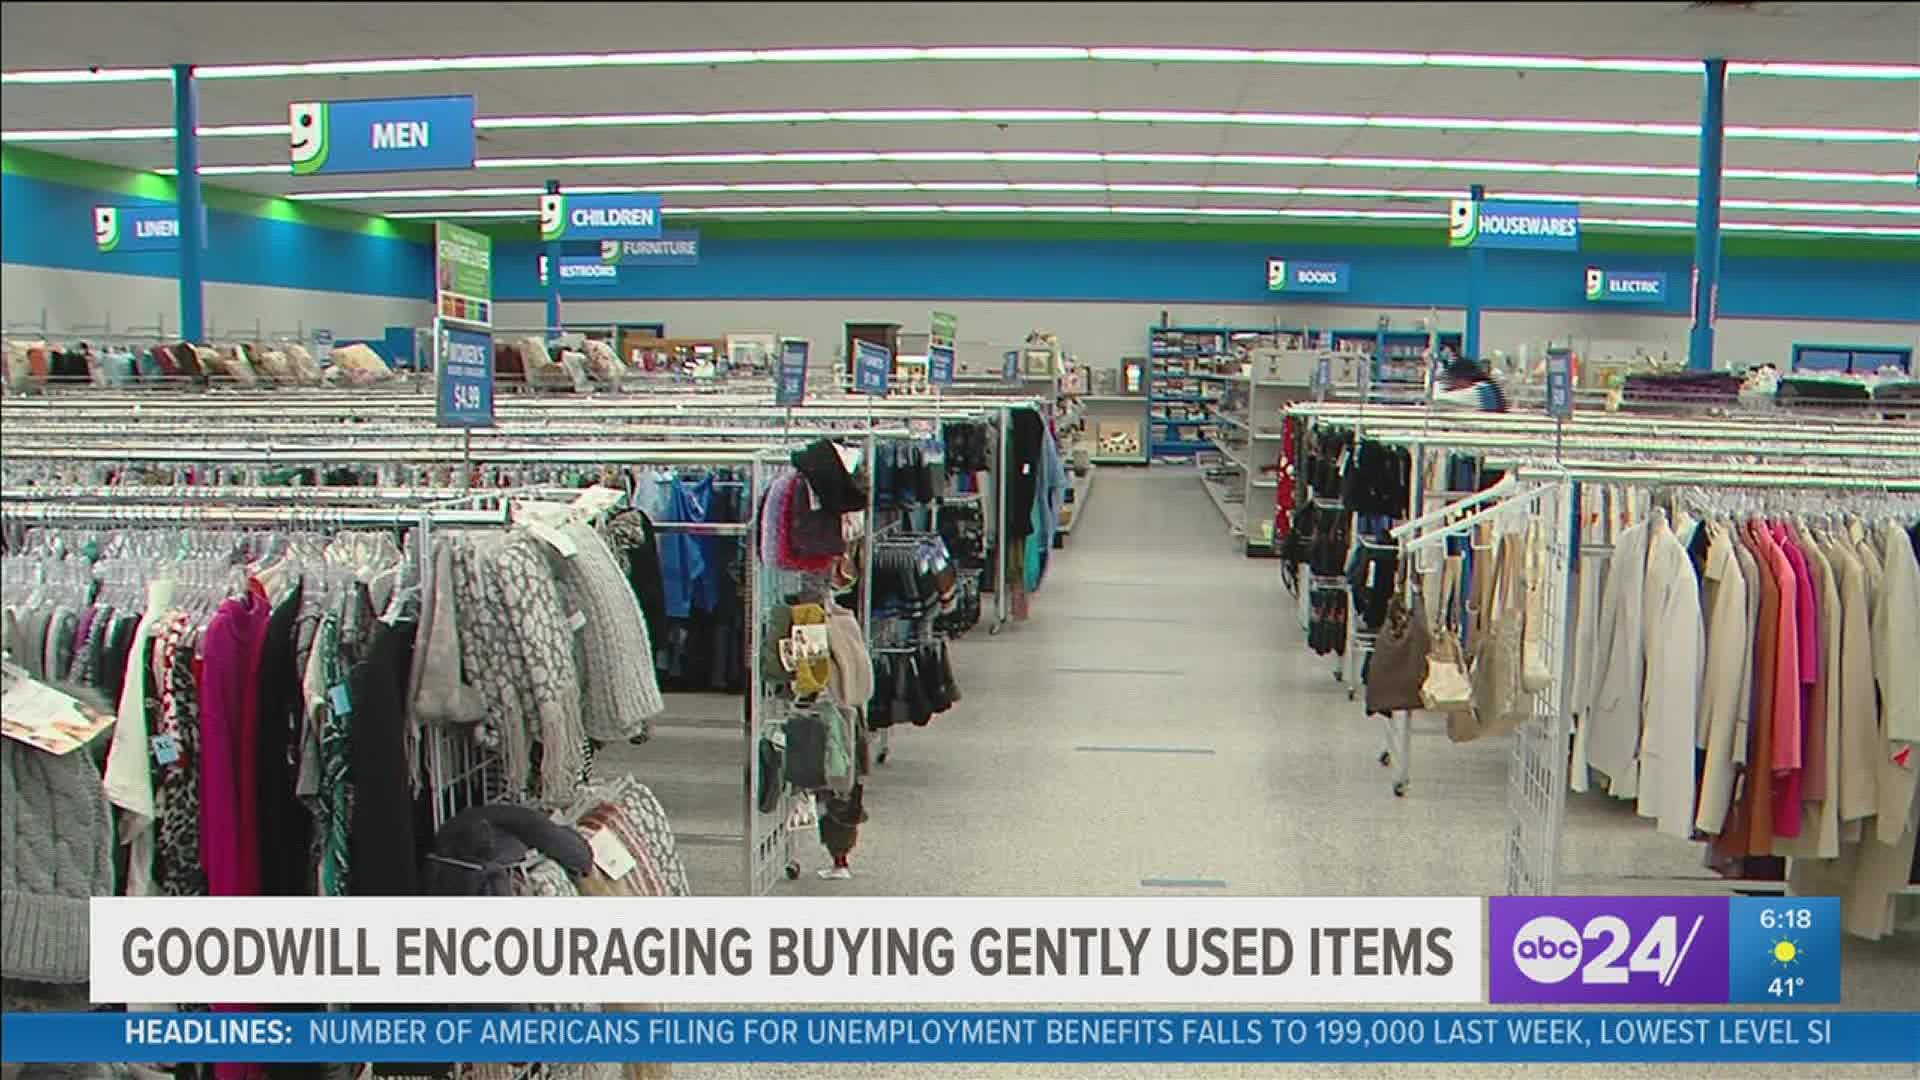 Goodwill says buying gently used items goes directly back into its missions for adult services and jobs.